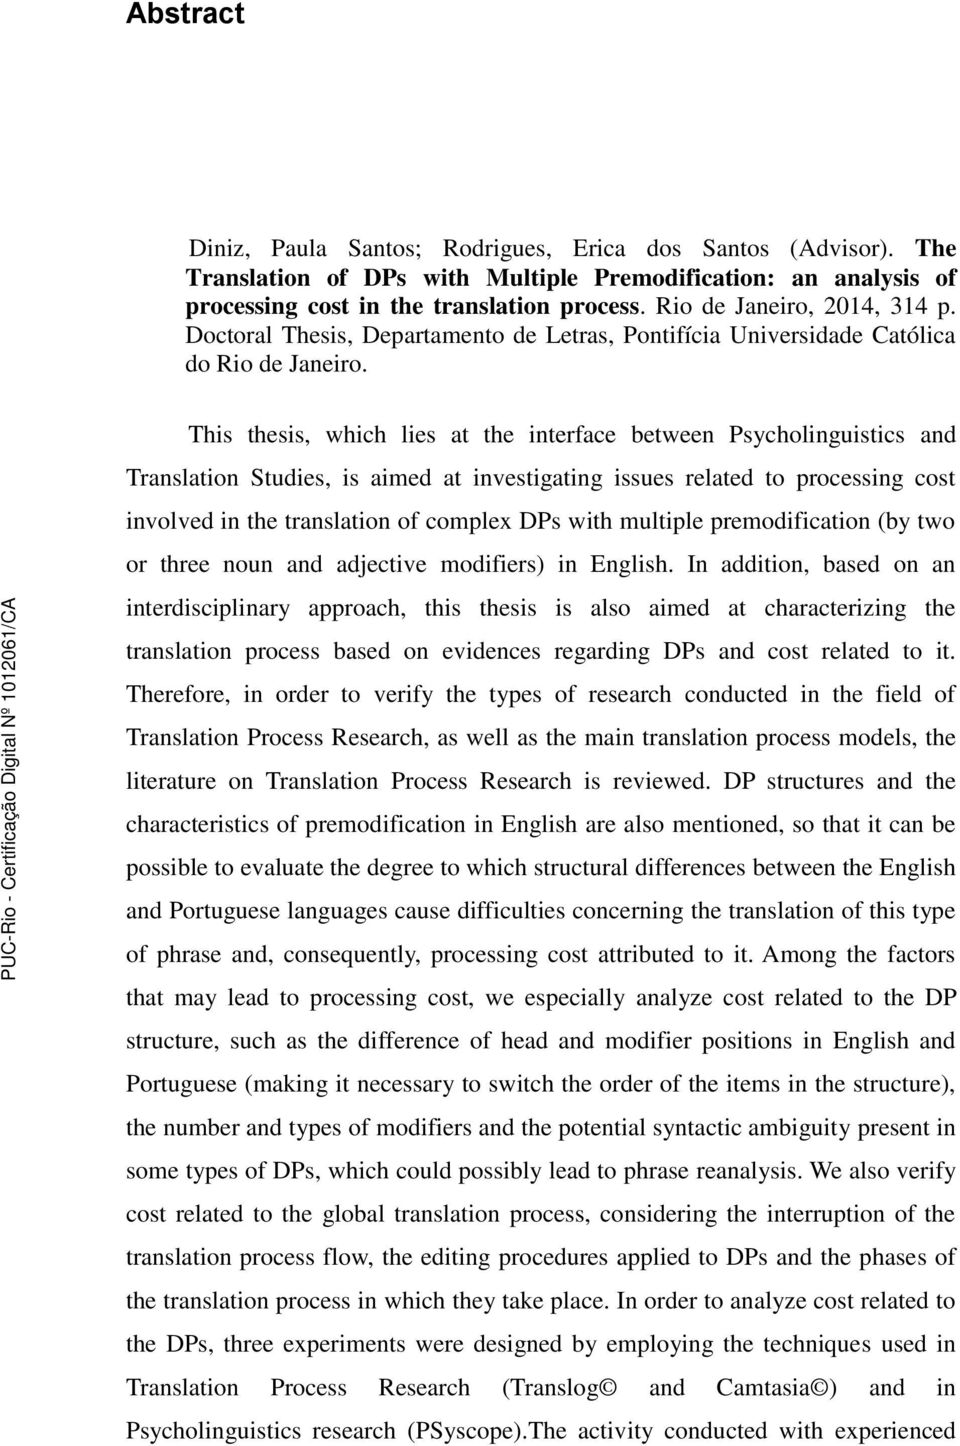 This thesis, which lies at the interface between Psycholinguistics and Translation Studies, is aimed at investigating issues related to processing cost involved in the translation of complex DPs with